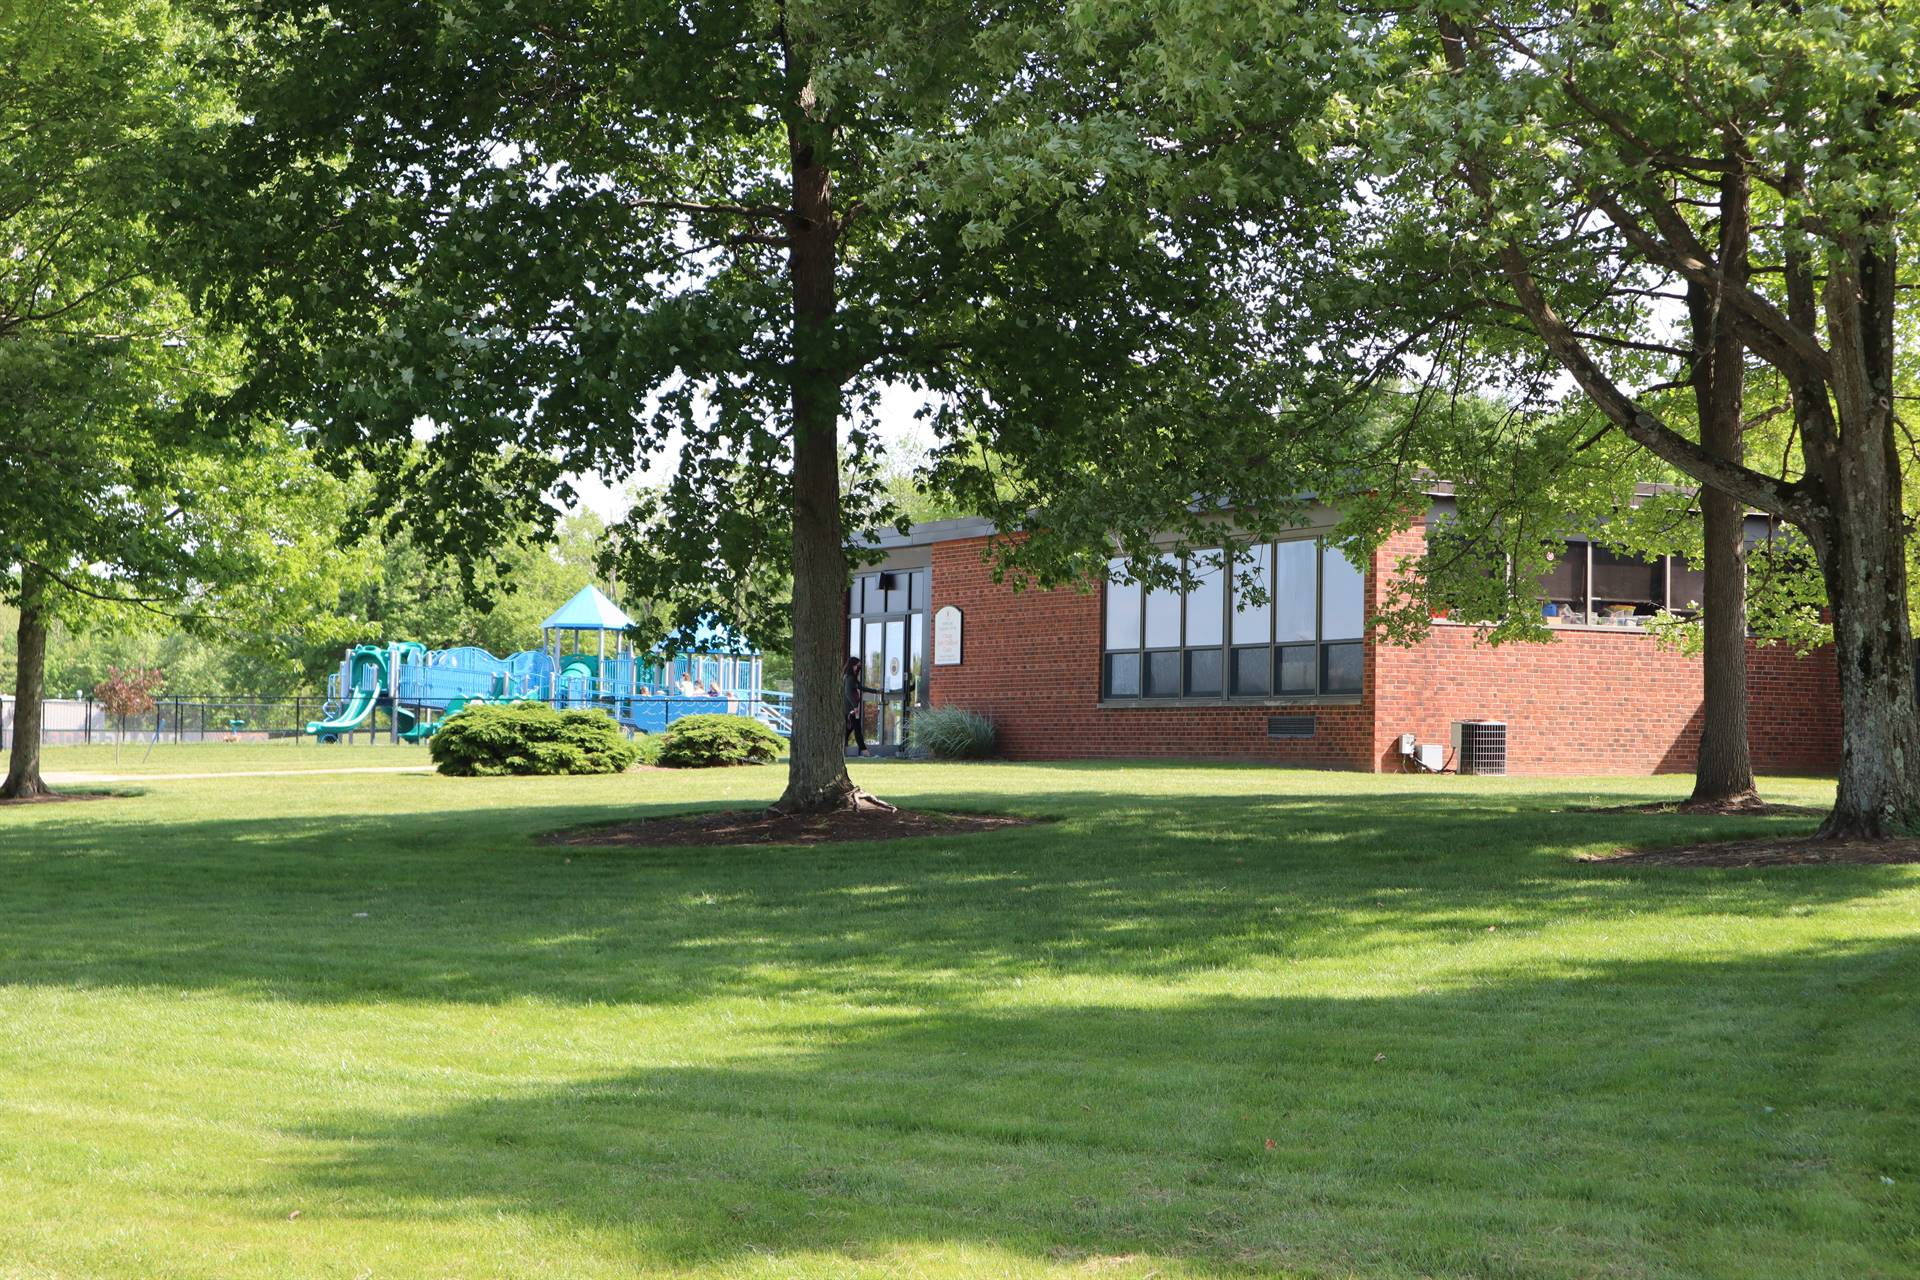 Picture of the outside of Pepper Pike Learning Center with playground in the background